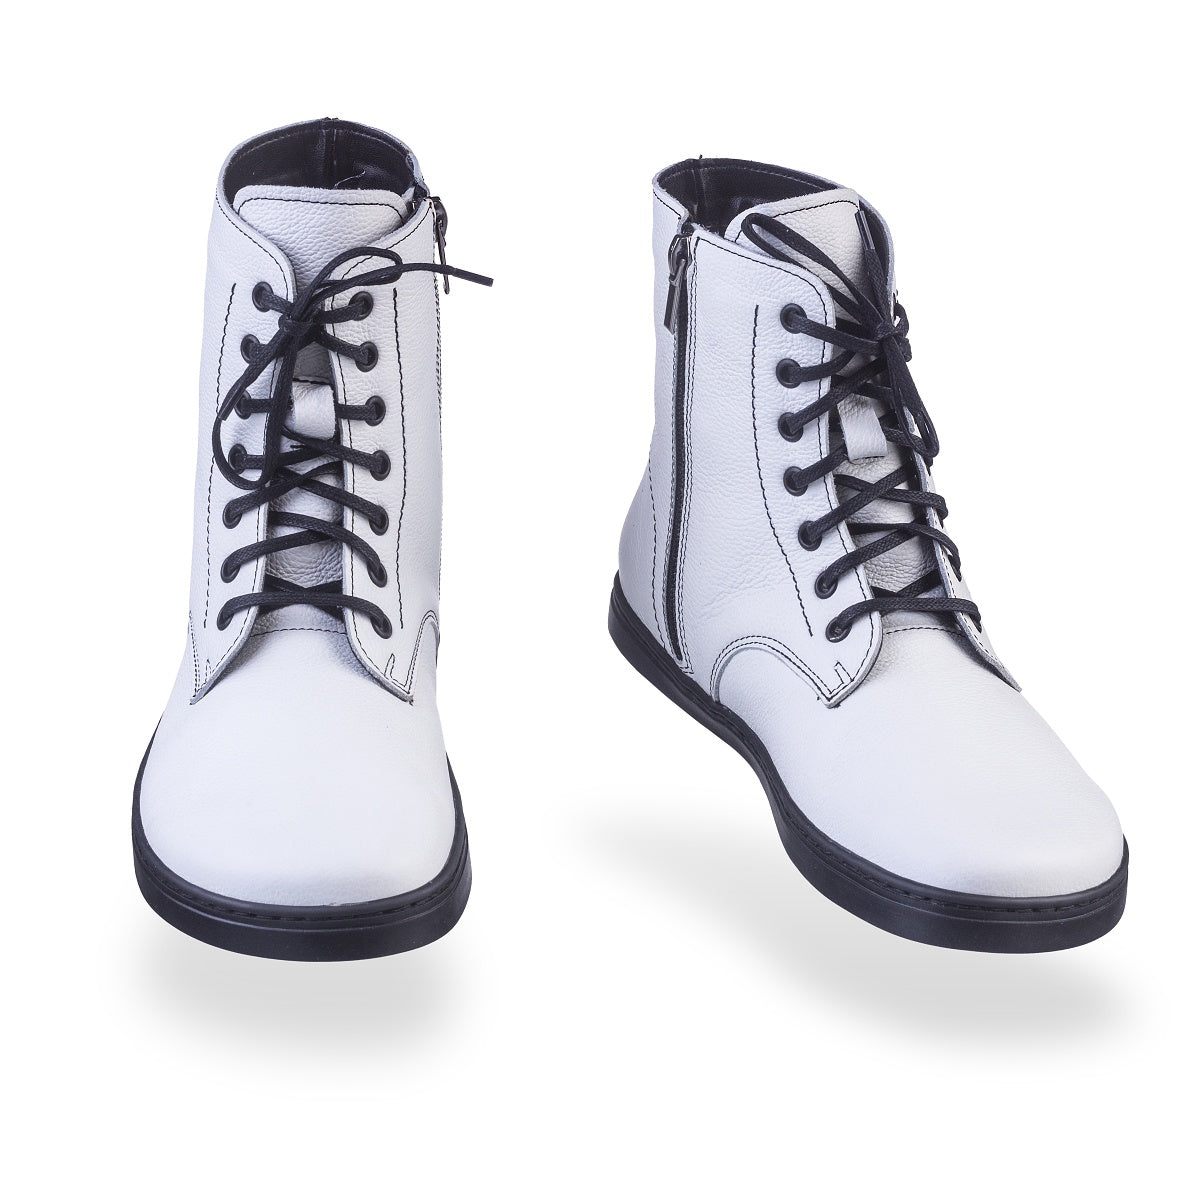 A photo of Peerko Go combat boots made with smooth leather, fleece, and rubber soles. The boots are white in color, fleece lined, with a zipper at the side. Both boots are shown floating forward angled slightly to the right against a white background. #color_white